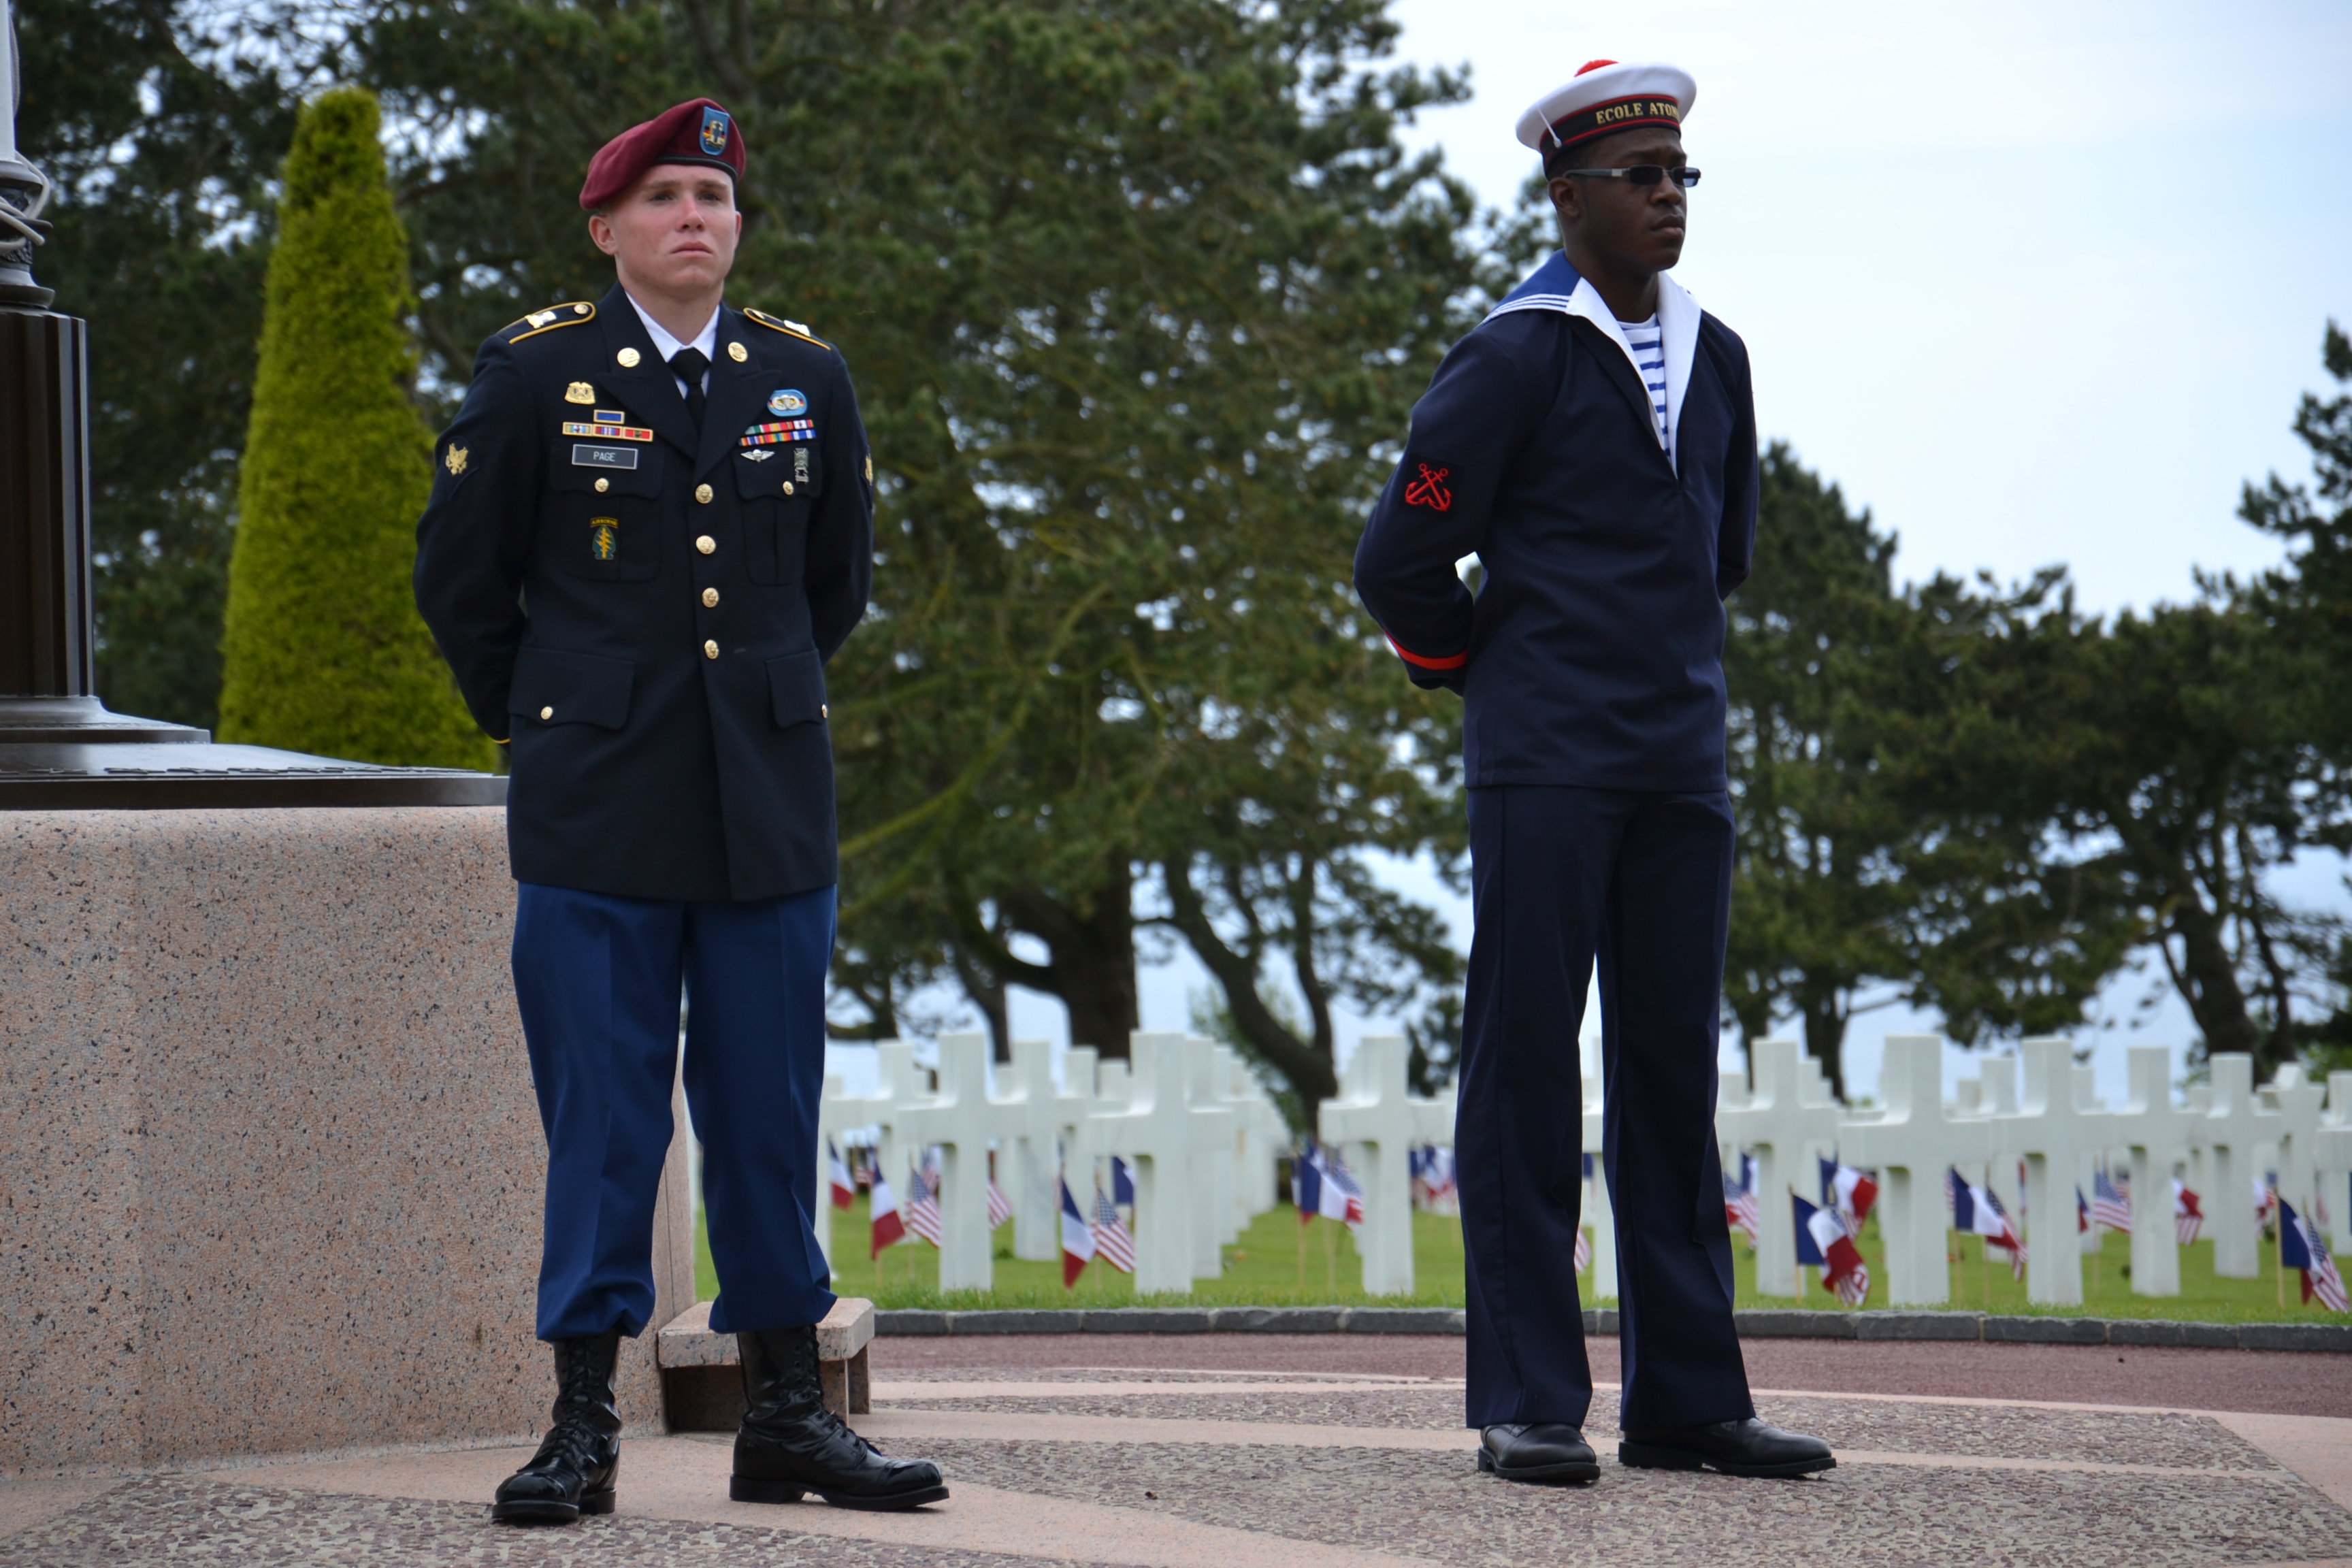 Members of the military participate in the 2012 Memorial Day ceremony at Normandy American Cemetery.